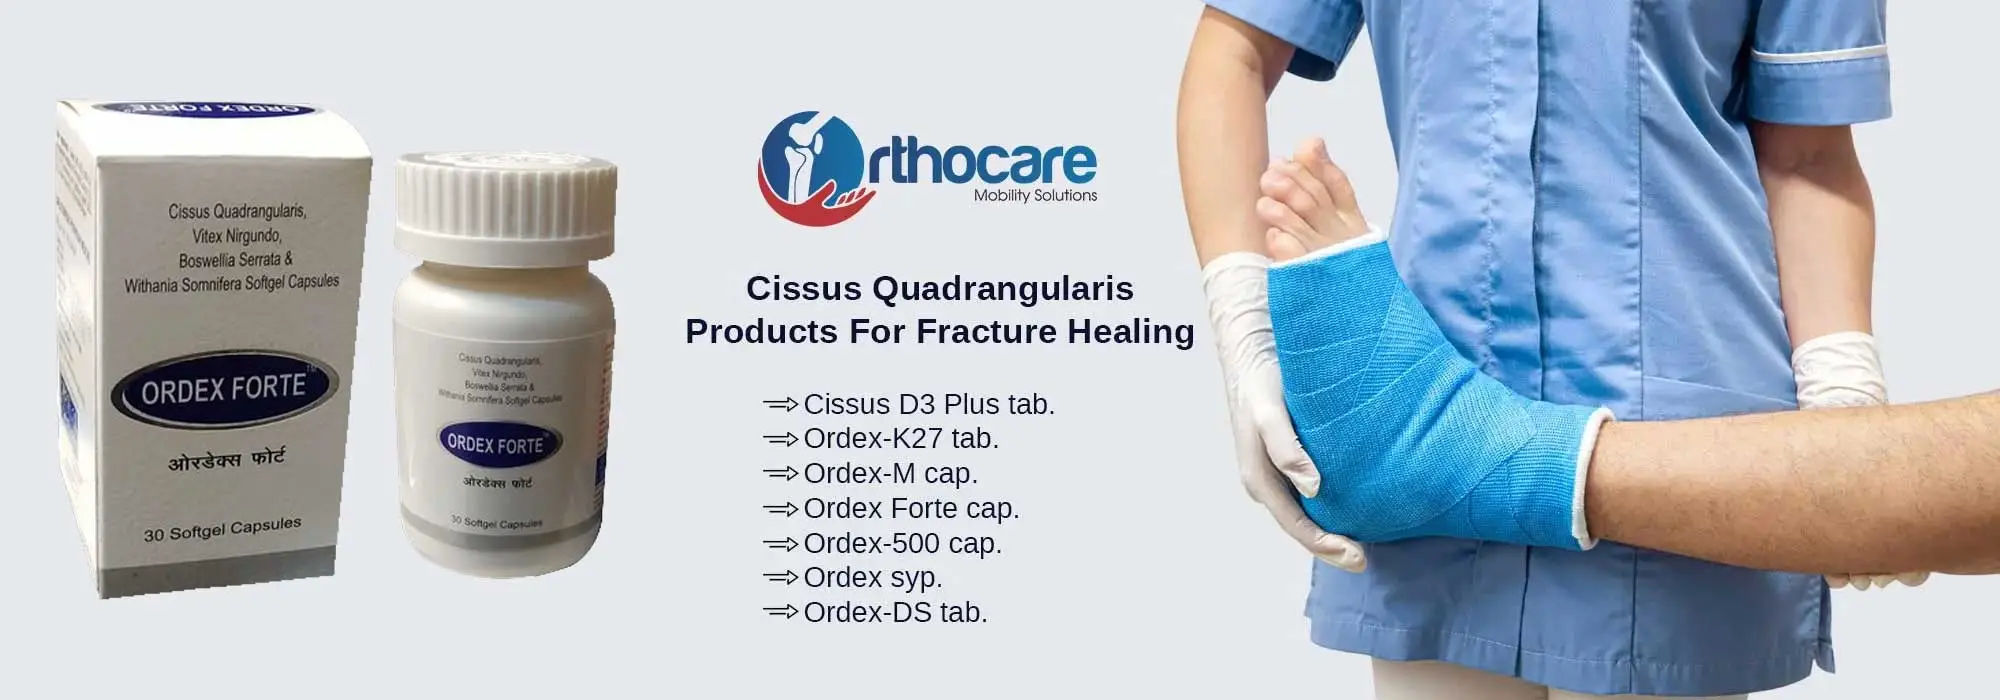 Cissus Quadrangularis Products For Fracture Healing Suppliers in Anjaw